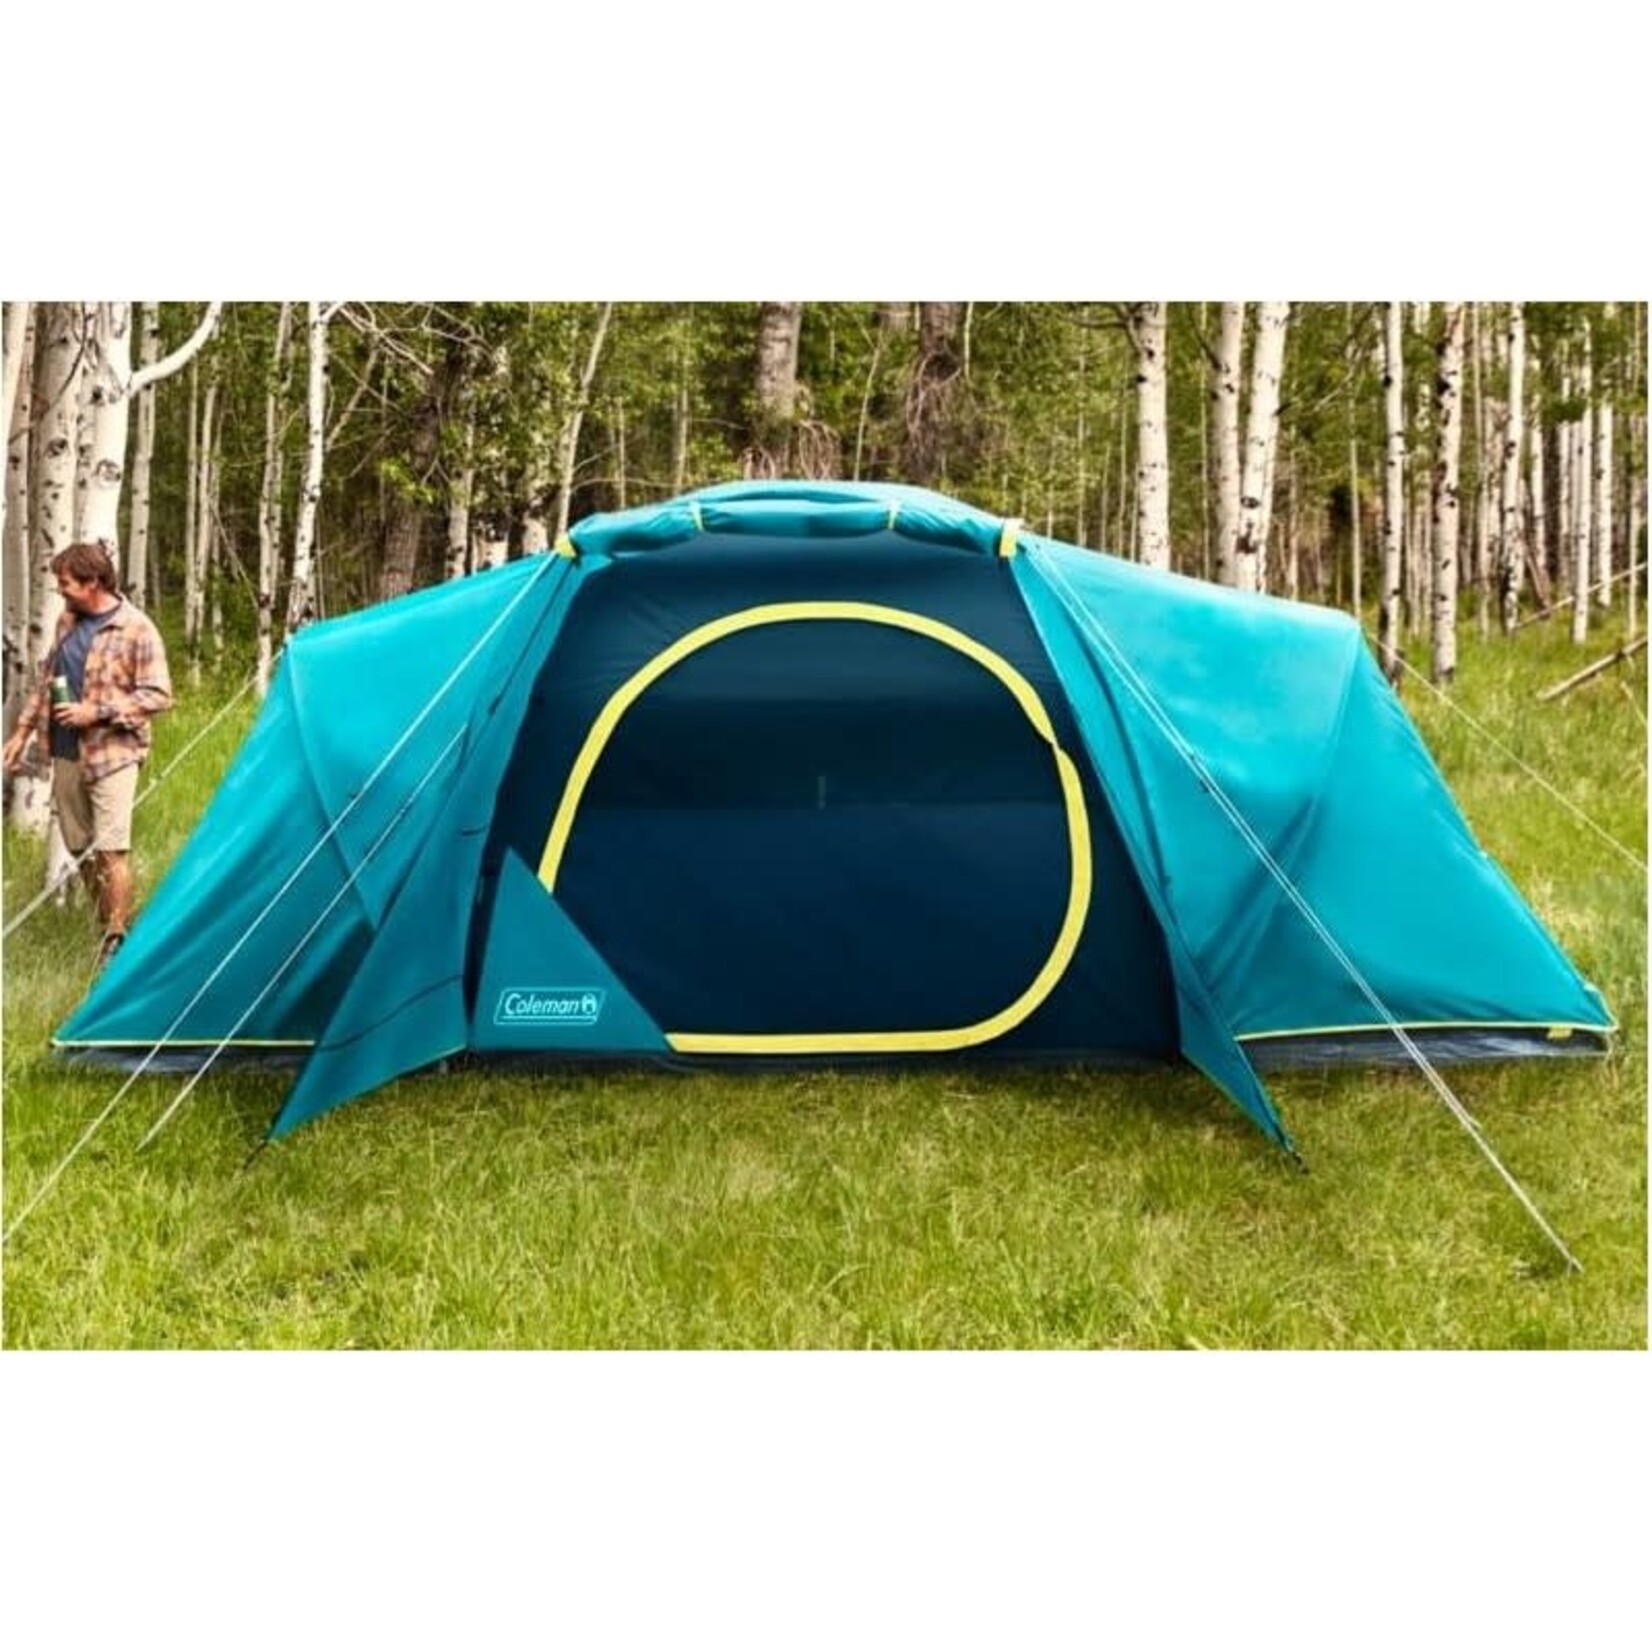 Coleman 8 Person Skydome Tent *NEW